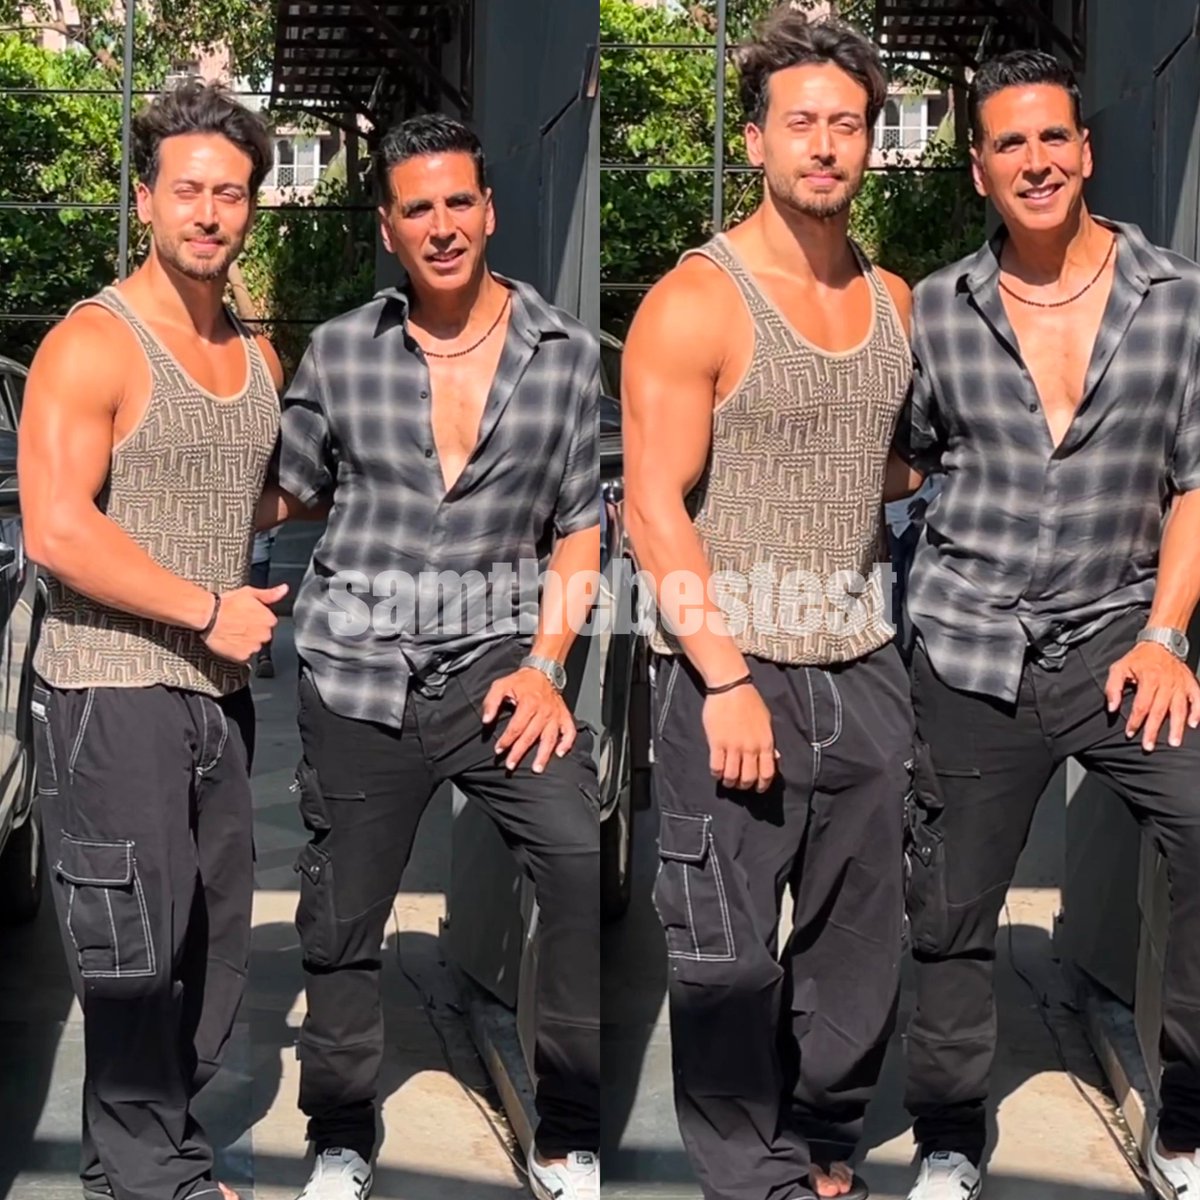 The latest click of #BMCM duo #AkshayKumar and #TigerShroff both are spotted outside @poojafilms office . #BadeMiyanChoteMiyan in theatres in just 2 days 10 April 💥 Book your tickets now on @bookmyshow @PaytmTickets